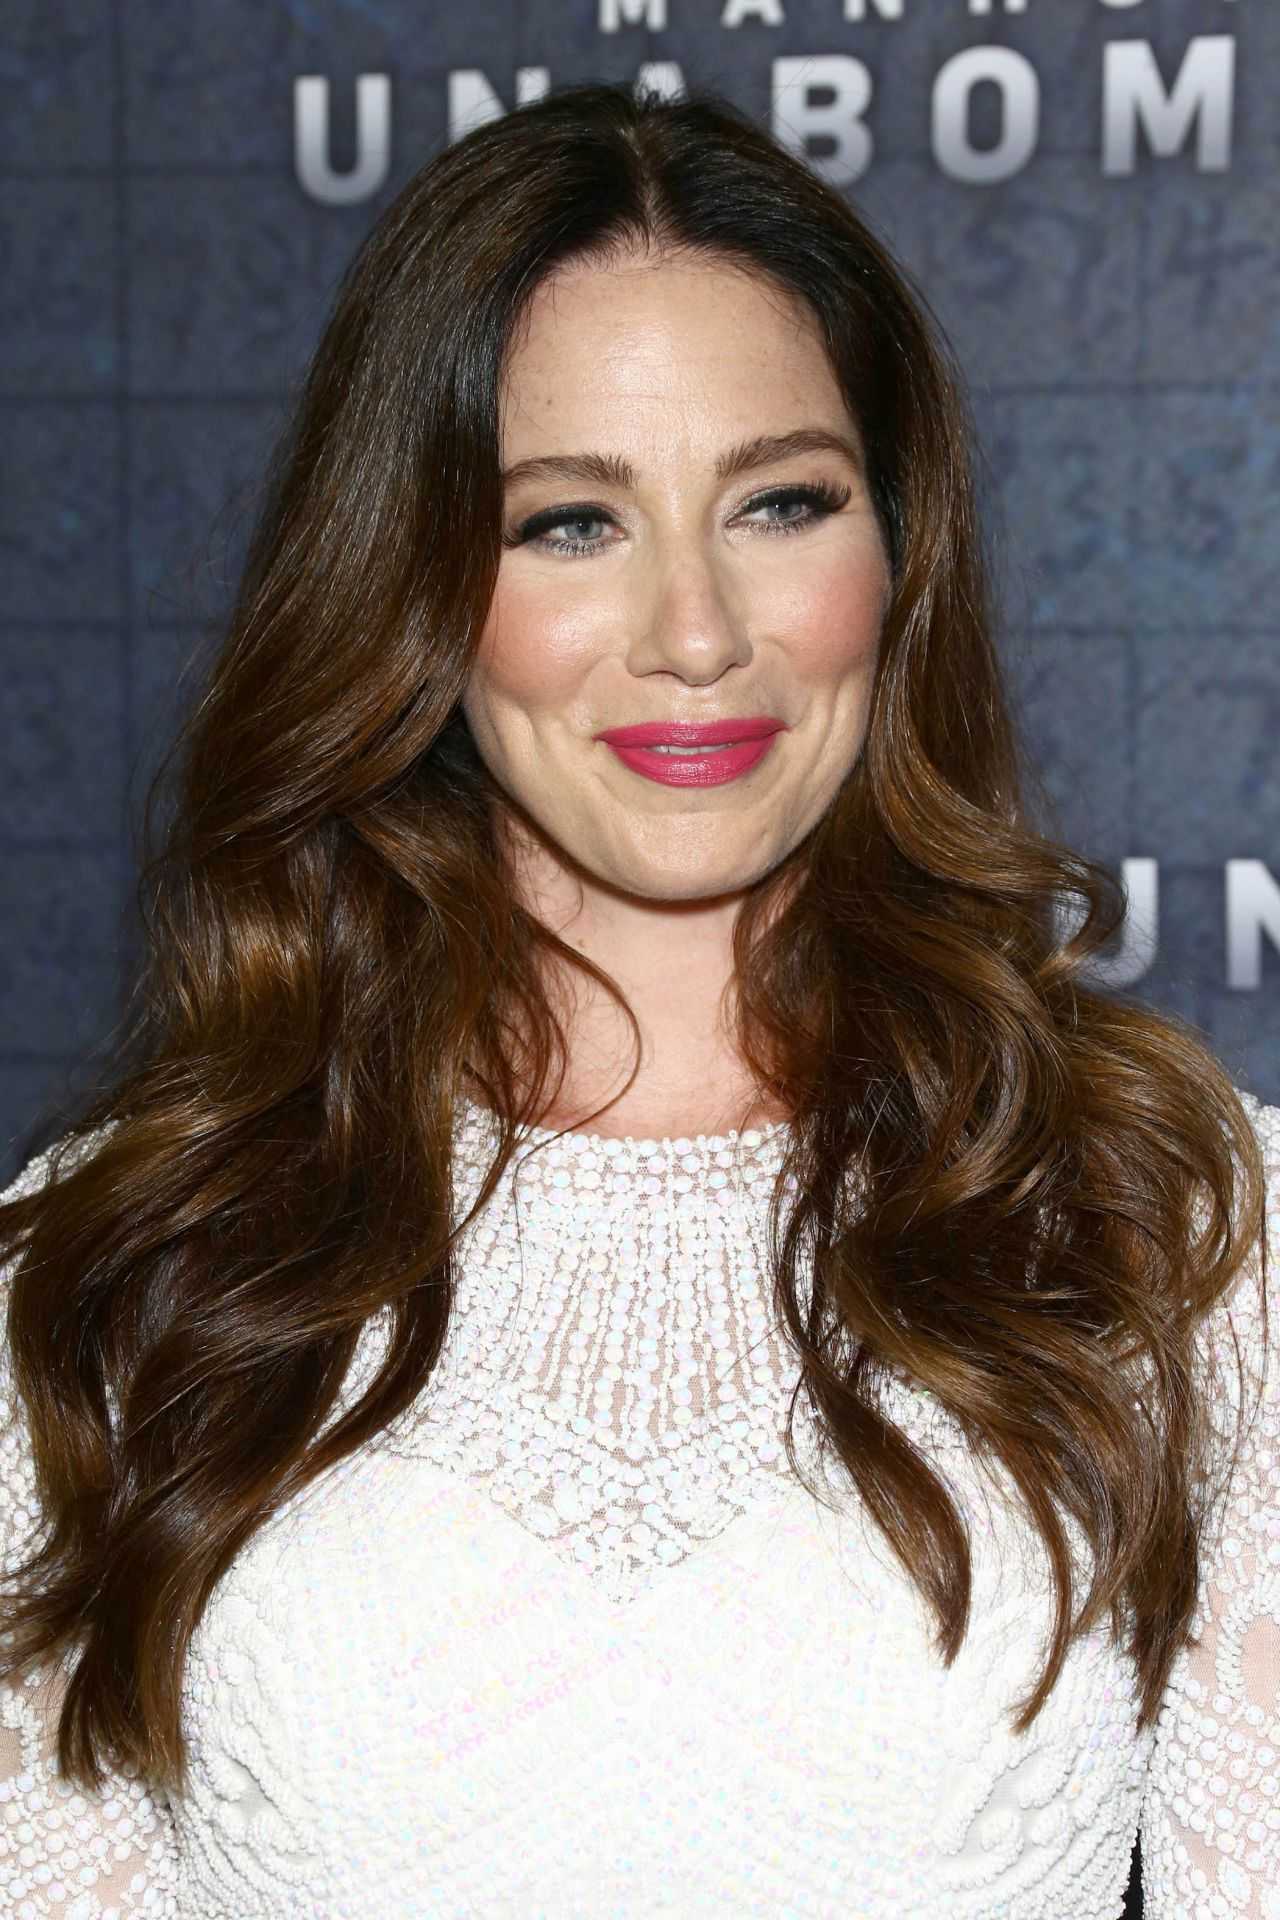 70+ Hot Pictures Of Lynn Collins Expose Her Smokin Hot Body 206